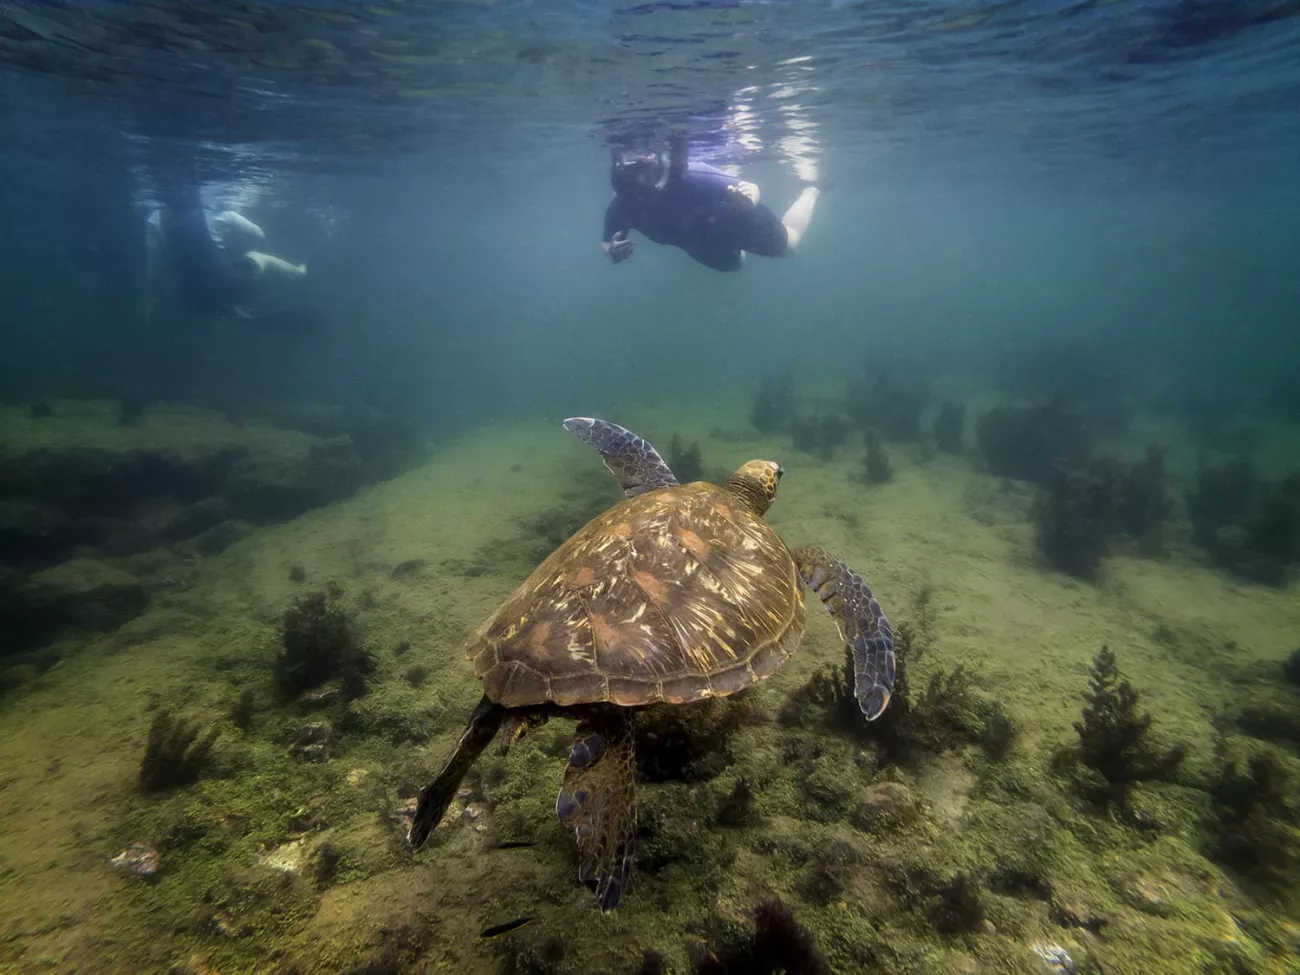 Student snorkeling with sea turtles